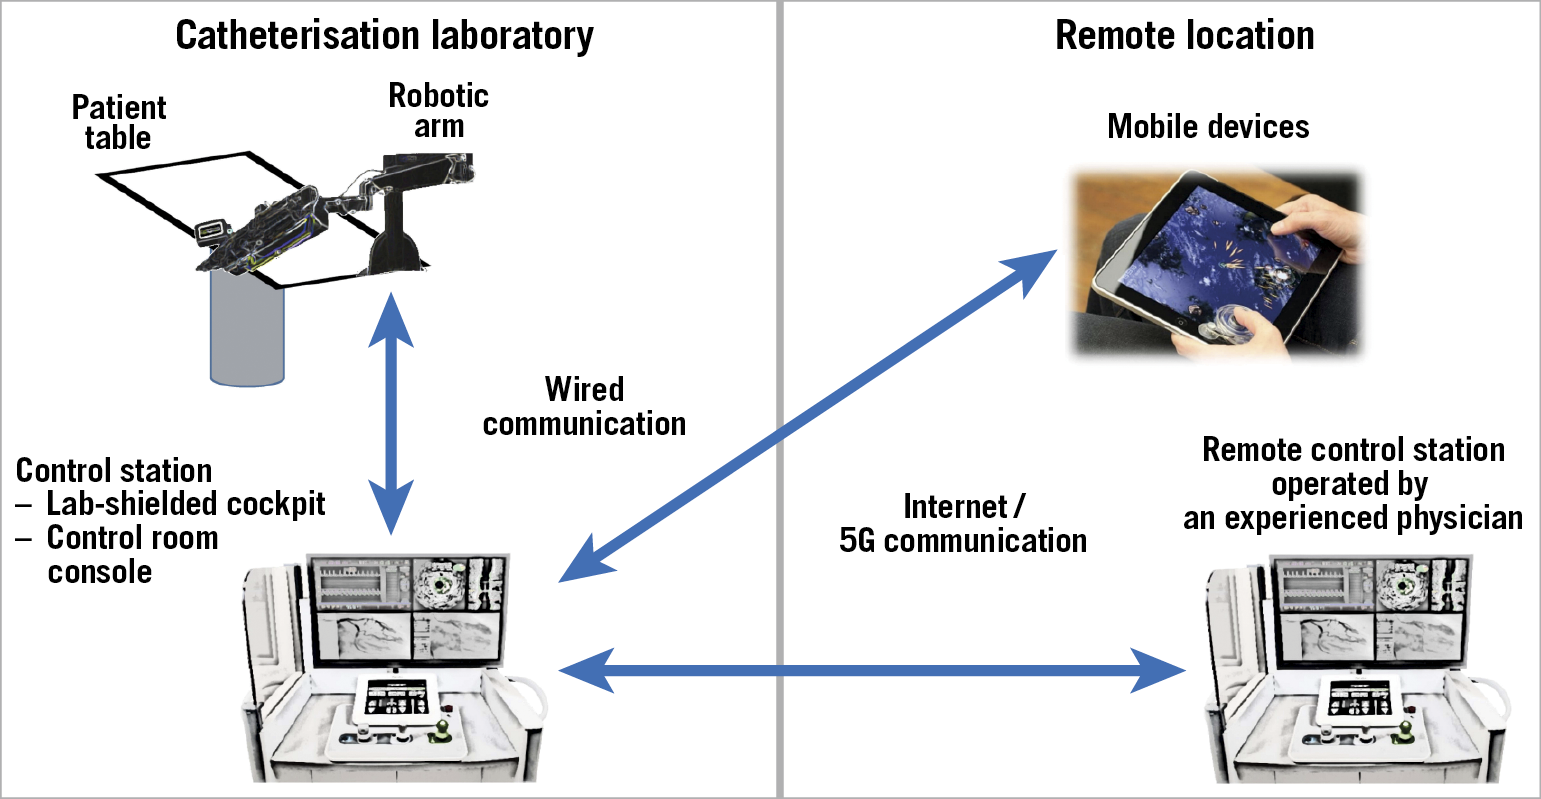 Figure 4. Local and remote schematics. The robotic arm, located in the catheterisation laboratory, is hard-wired to the control station, which can be placed either in the catheterisation laboratory or in the control room, according to the operator’s preference. A second remote control unit, which can also be installed on a mobile device, is connected through the internet or a 5G wireless connection and can be placed in any other location (i.e., either elsewhere in the same or a different hospital, or any location worldwide).